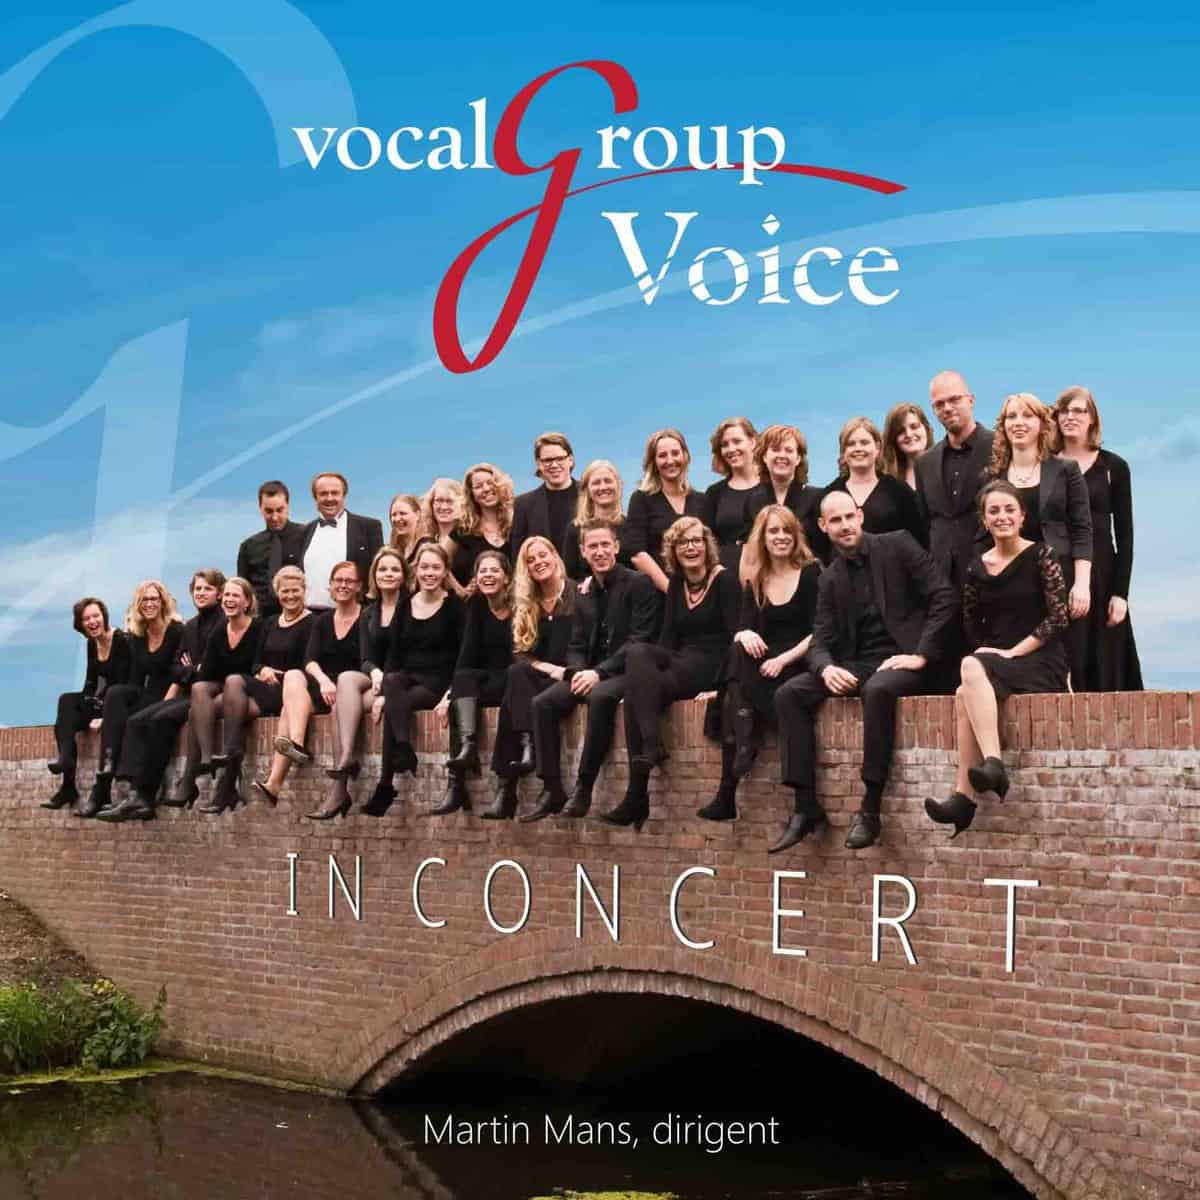 Cover image "Vocal Group Voice" by Martin Mans